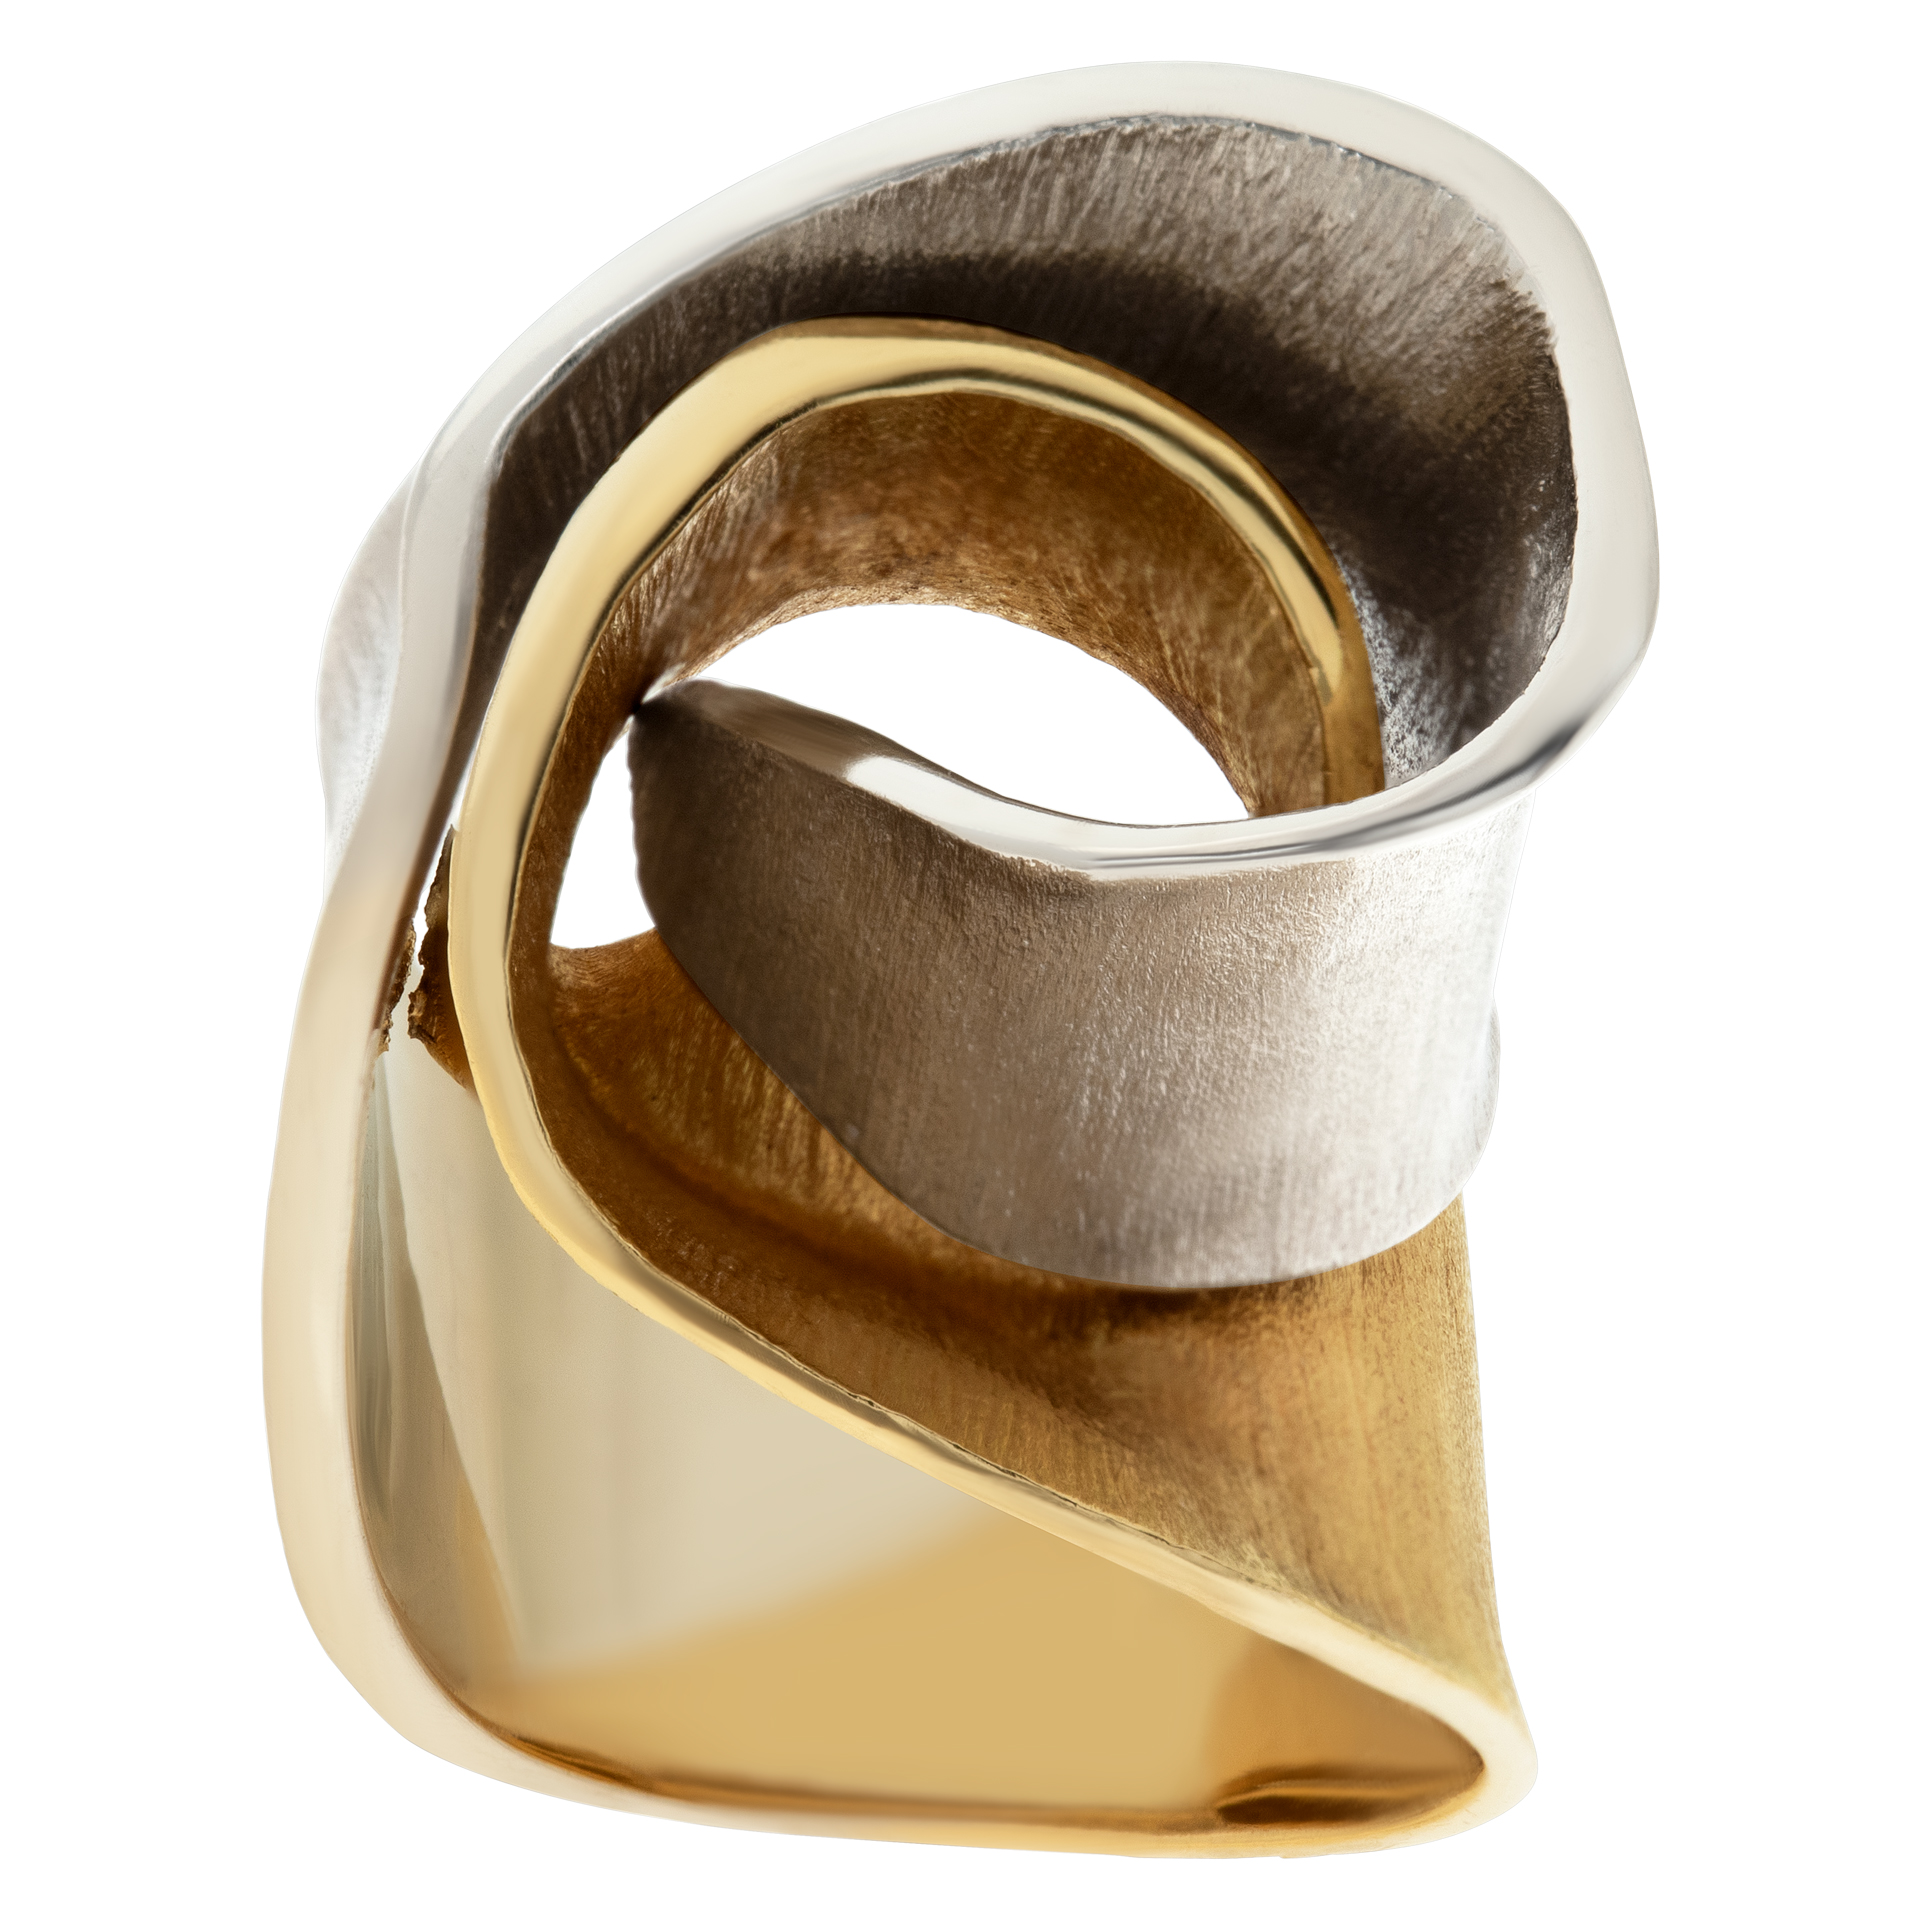 H Stern wide curled ribbon ring in 18k white and yellow gold